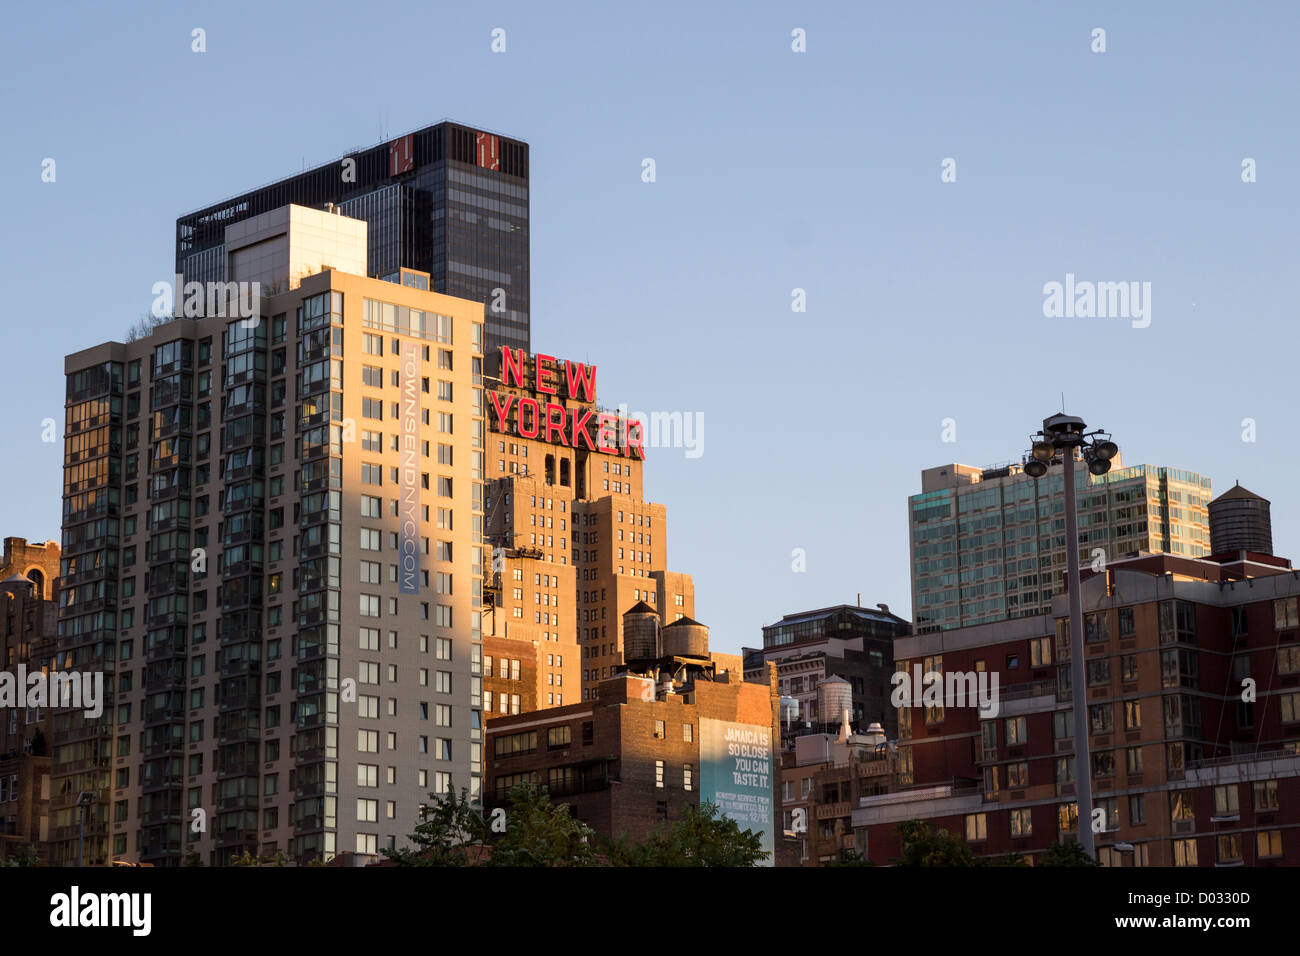 View of New Yorker hotel building in Manhattan, New York Stock Photo